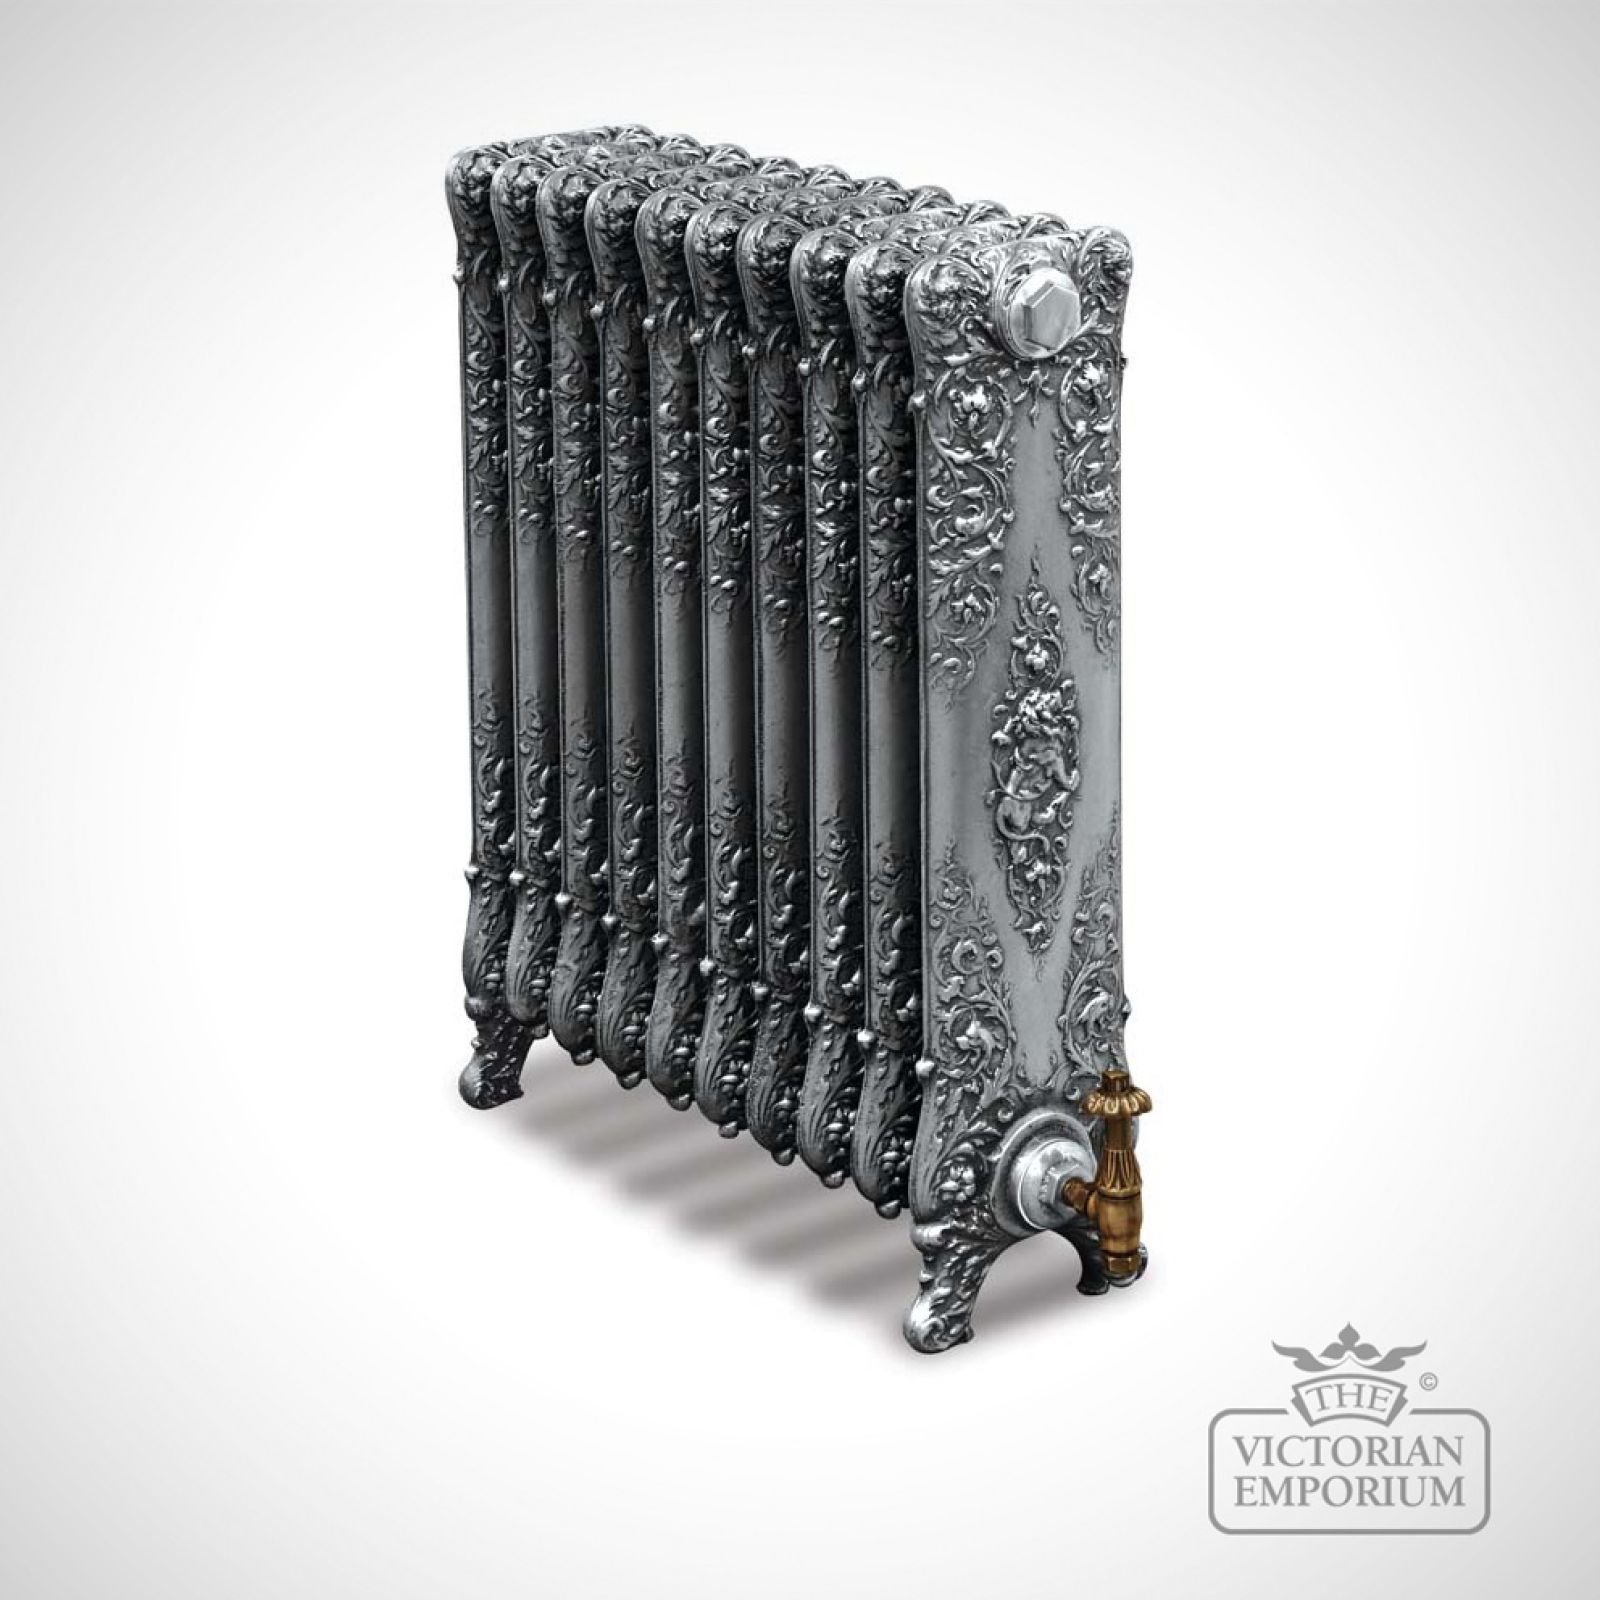 St Mark Cast Iron Radiator with Traditional Ornate Design - 800mm high